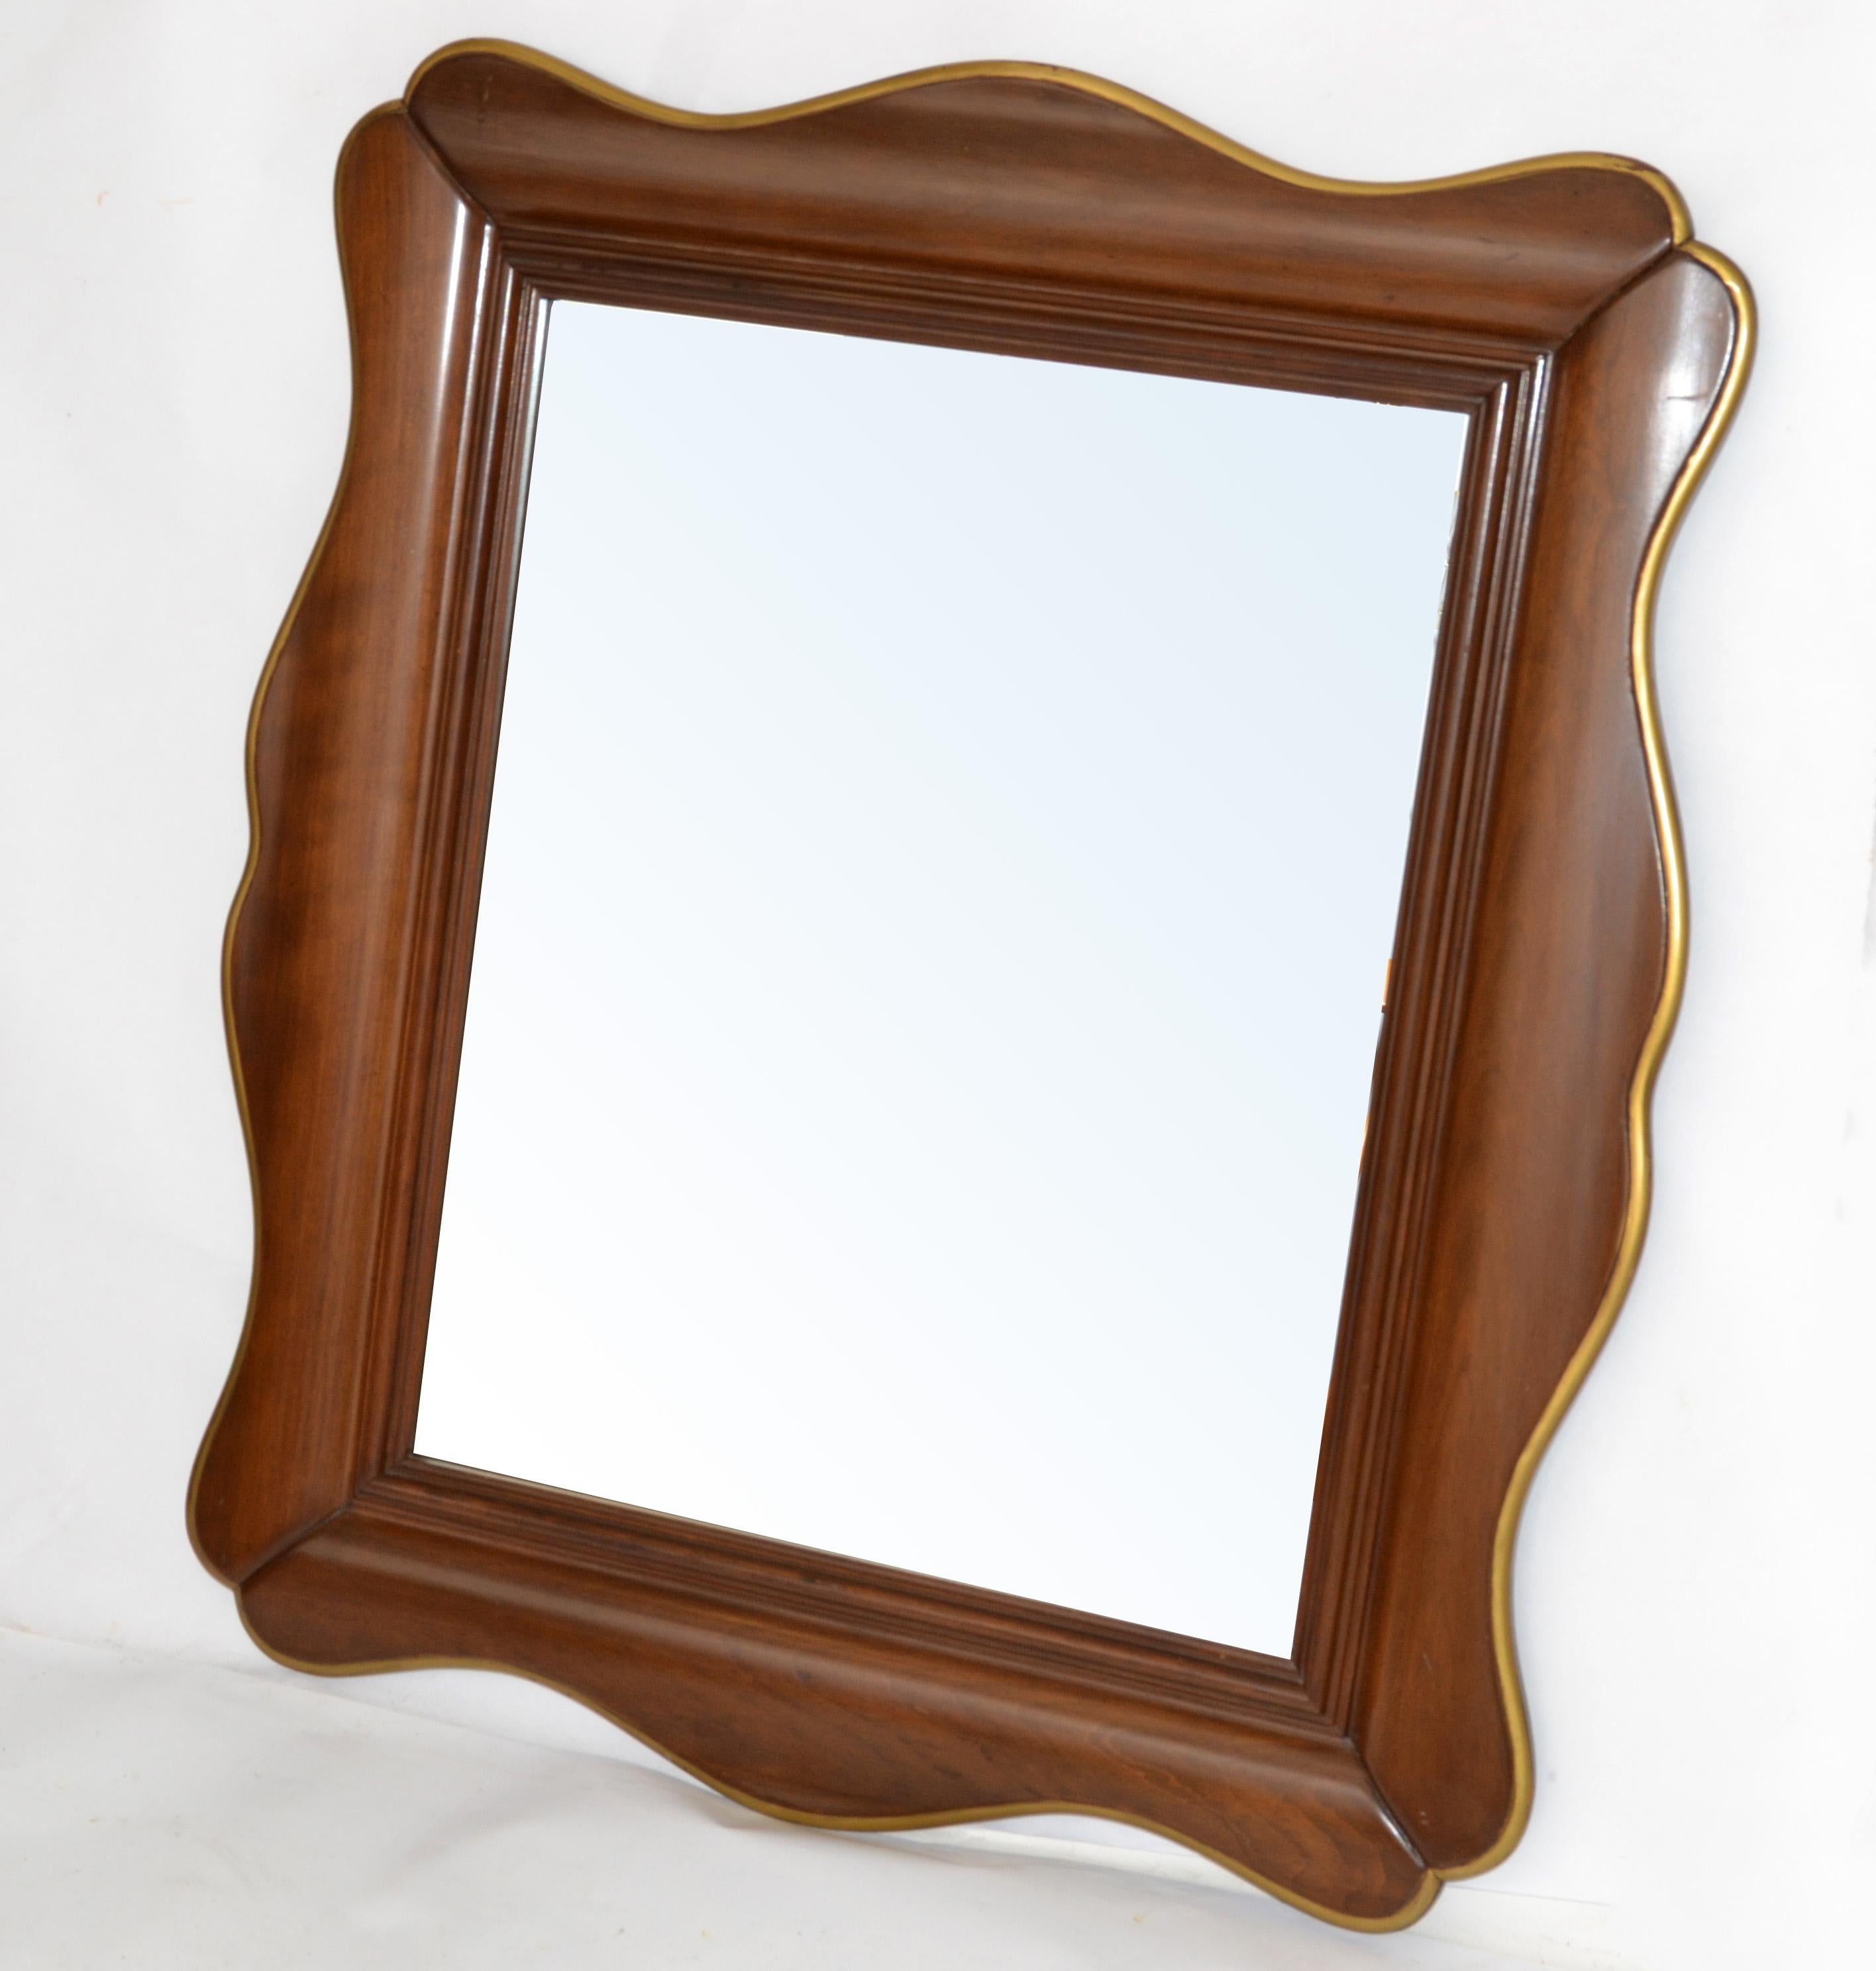 Original John Widdicomb Mid-Century Modern Scalloped hand carved walnut wall mirror with giltwood accent.
Made in America circa 1970.
Makers Mark on the back.
Mirror Size: 17 x 21 inches.
This is rare to find vintage mirror from the Widdicomb